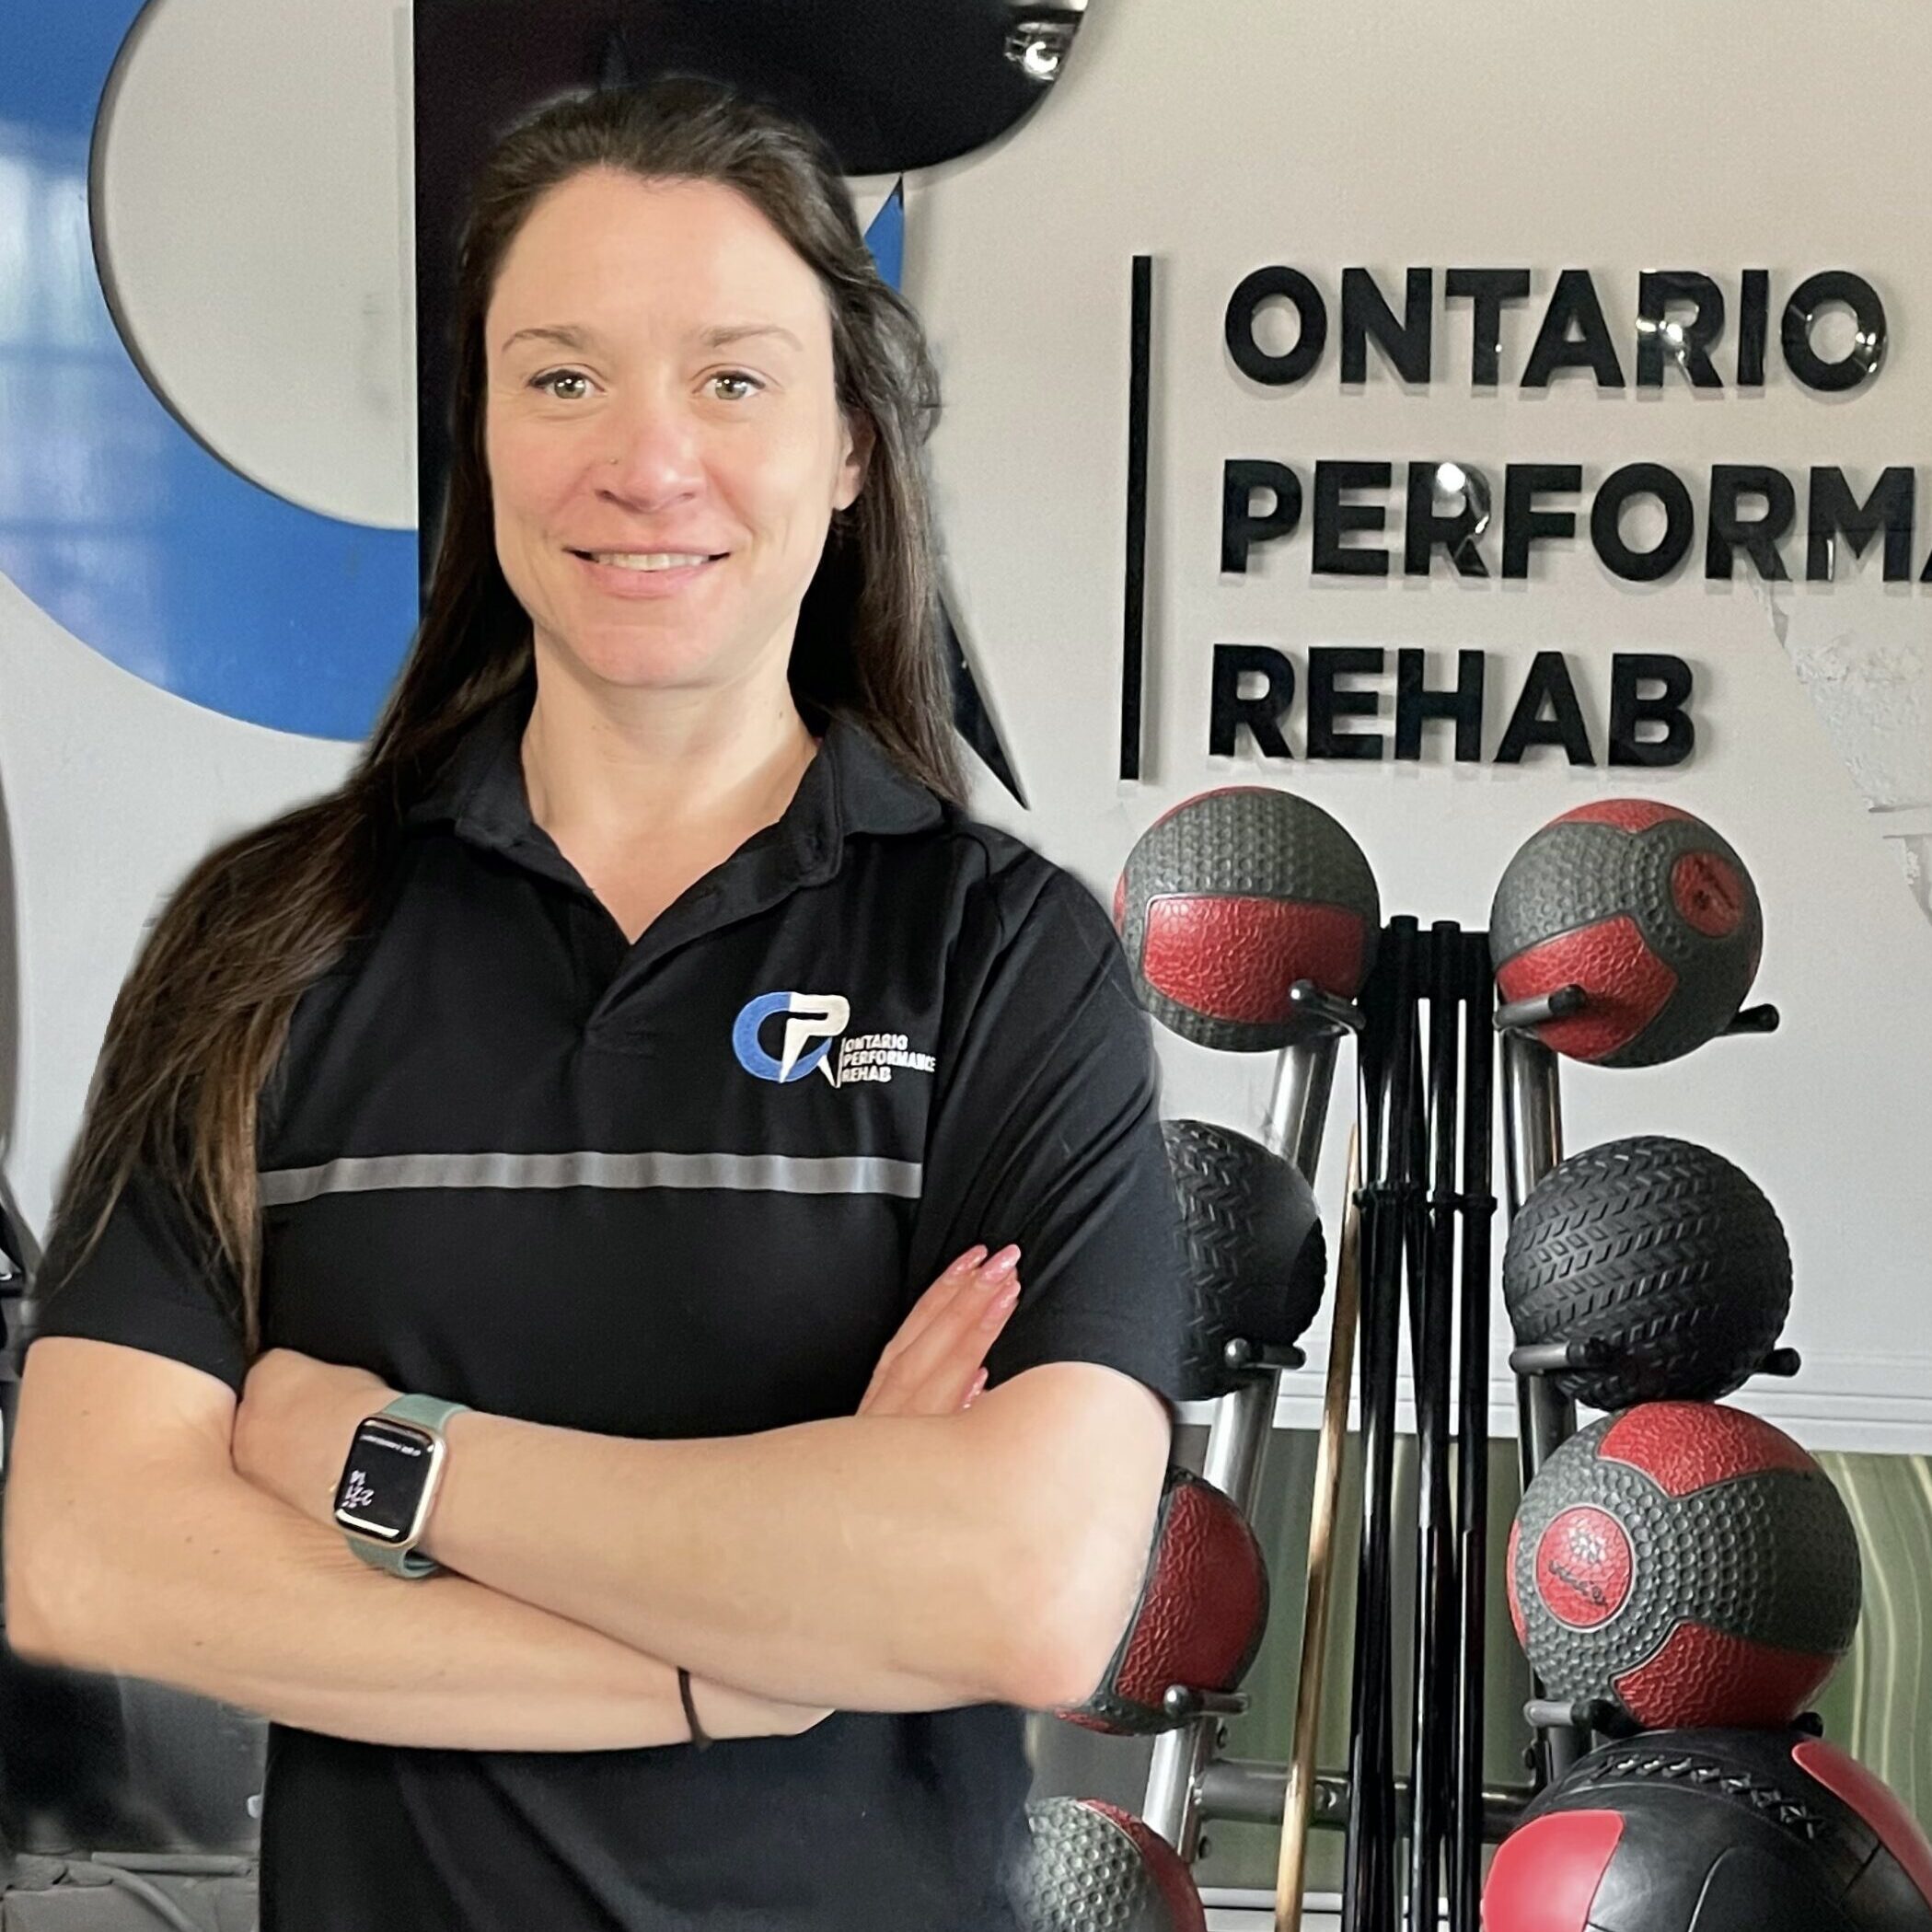 CHRISTINA PTA PHYSIOTHERAPY TRAINER AT ONTARIO PERFORMANCE REHAB